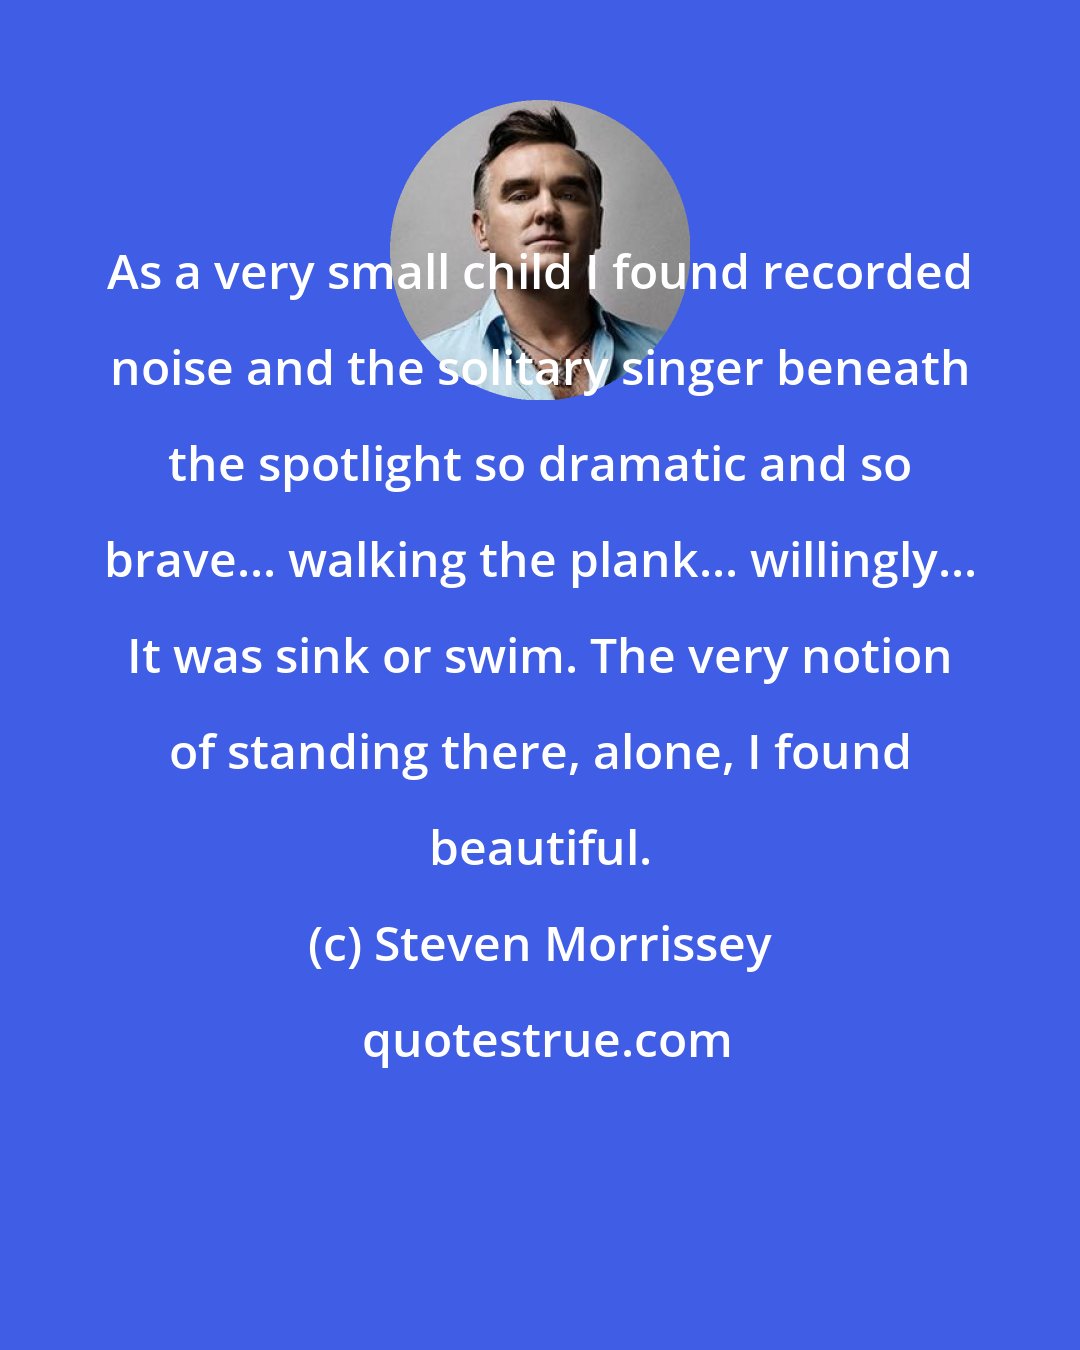 Steven Morrissey: As a very small child I found recorded noise and the solitary singer beneath the spotlight so dramatic and so brave... walking the plank... willingly... It was sink or swim. The very notion of standing there, alone, I found beautiful.